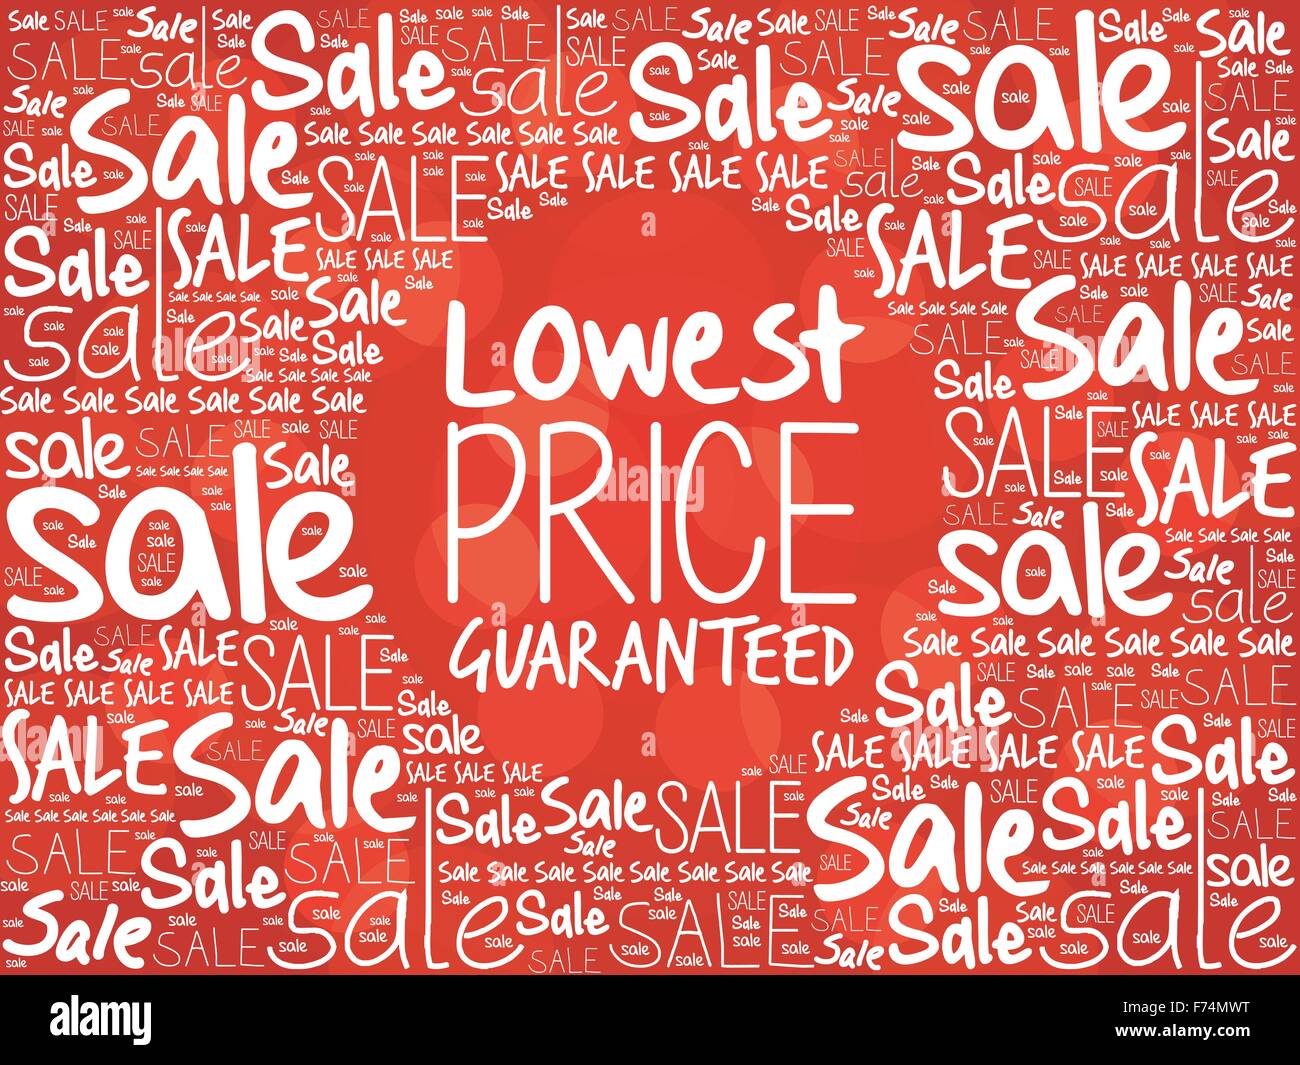 Lowest Price Guaranteed word cloud background, business concept Stock Vector